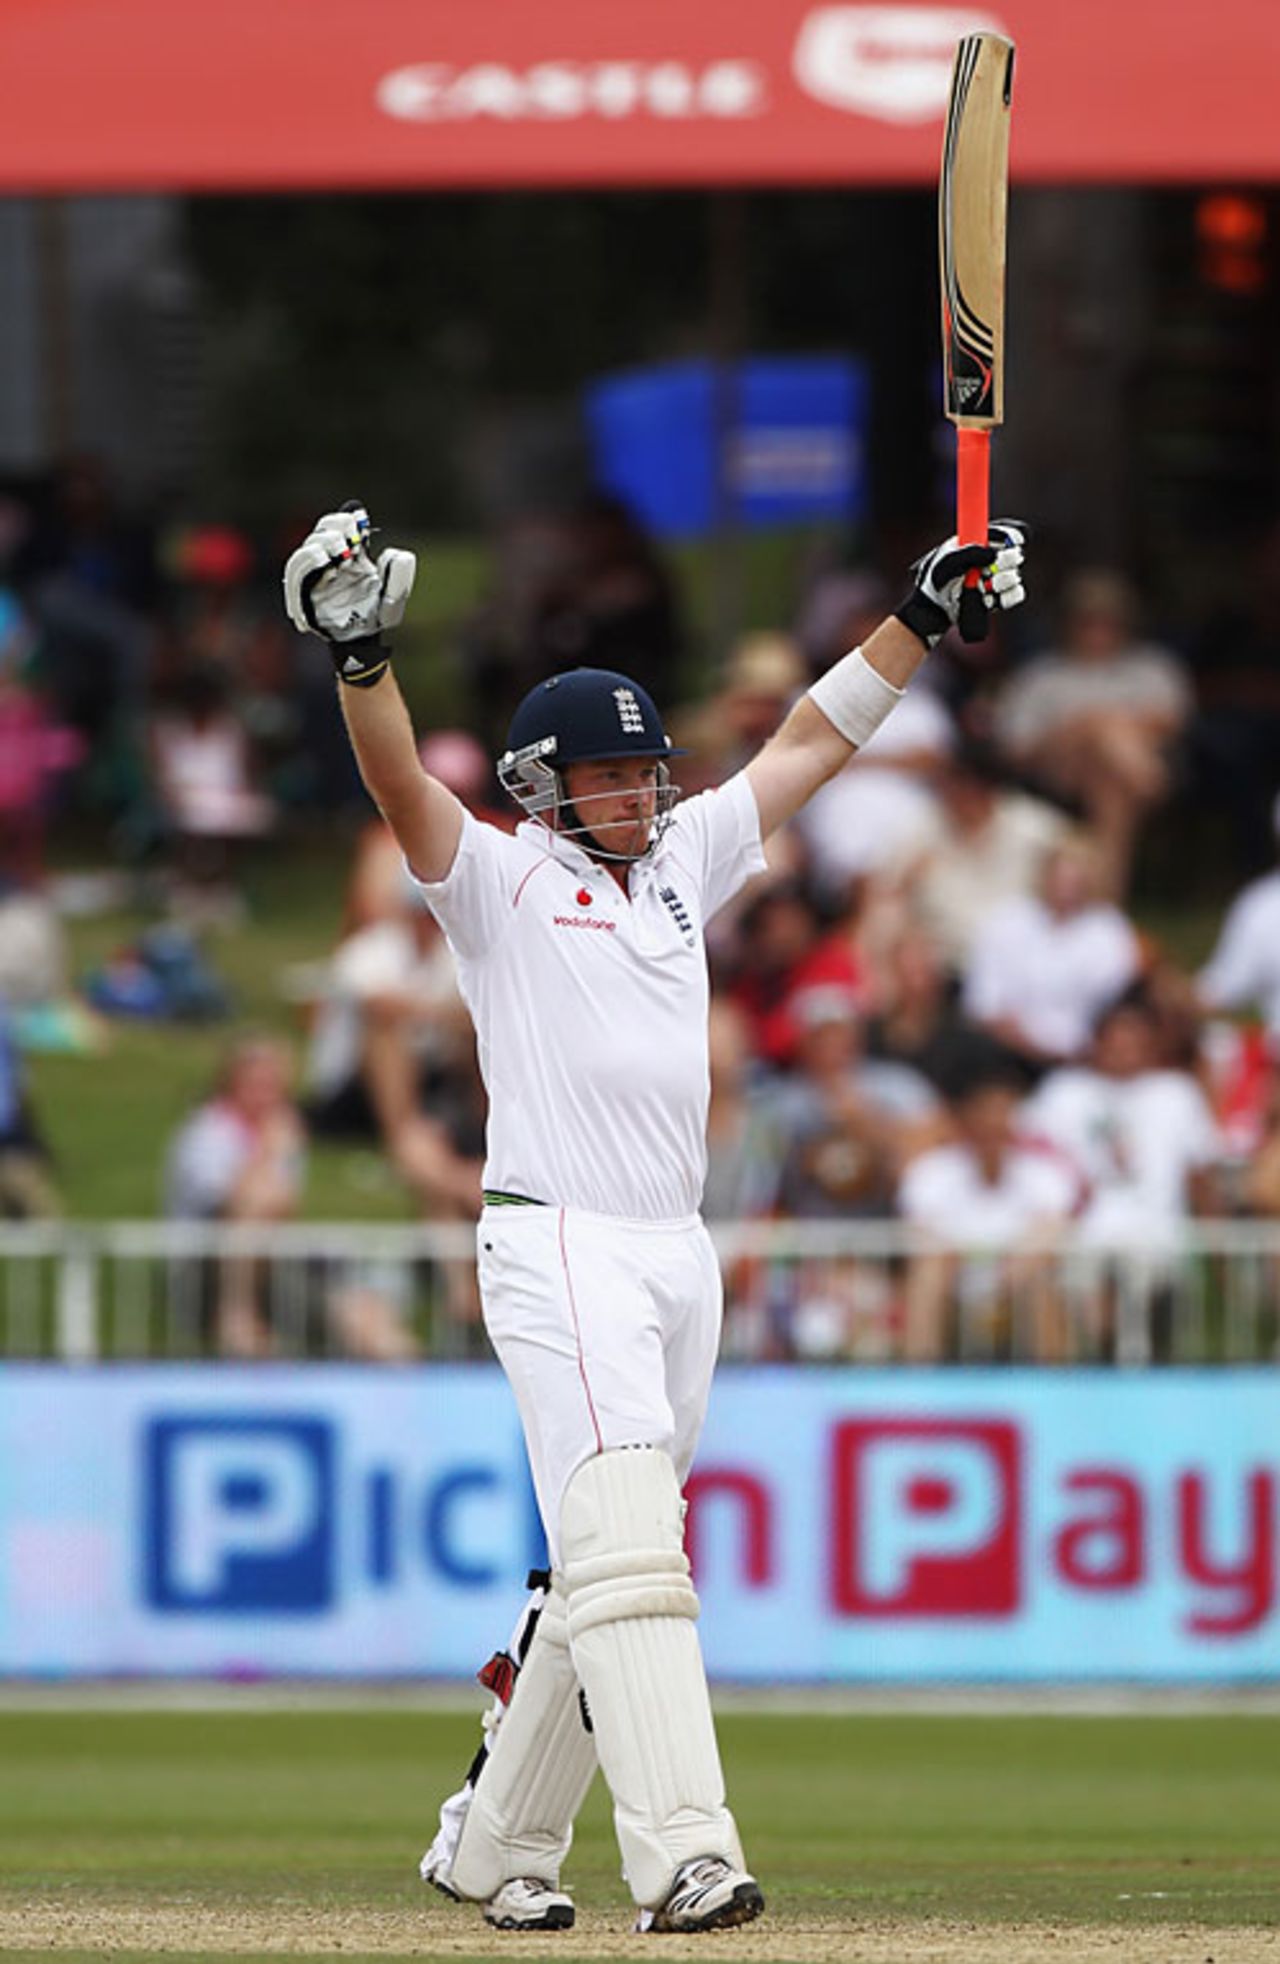 Ian Bell celebrates his ninth Test hundred, which helped put England in a strong position on day four, South Africa v England, 2nd Test, Durban, December 29, 2009 